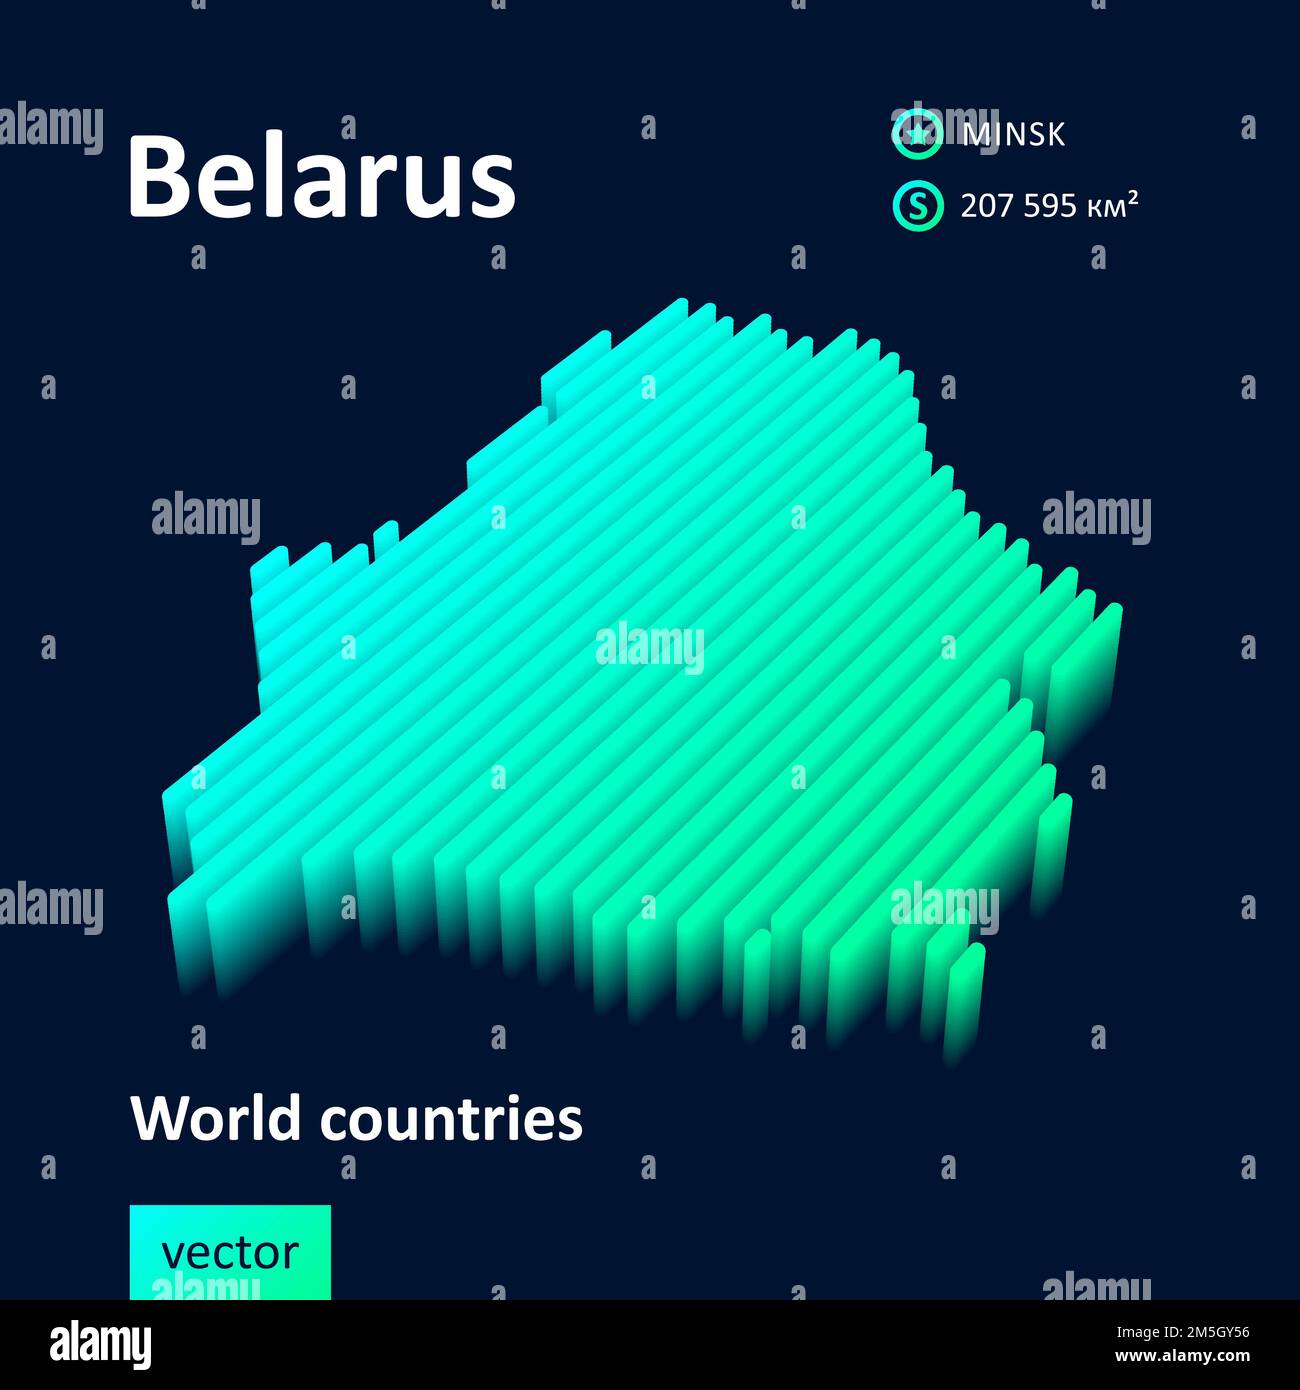 Belarus 3D map. Stylized striped neon digital isometric vector Map of Belarus is in green and mint colors on the dark blue background Stock Vector